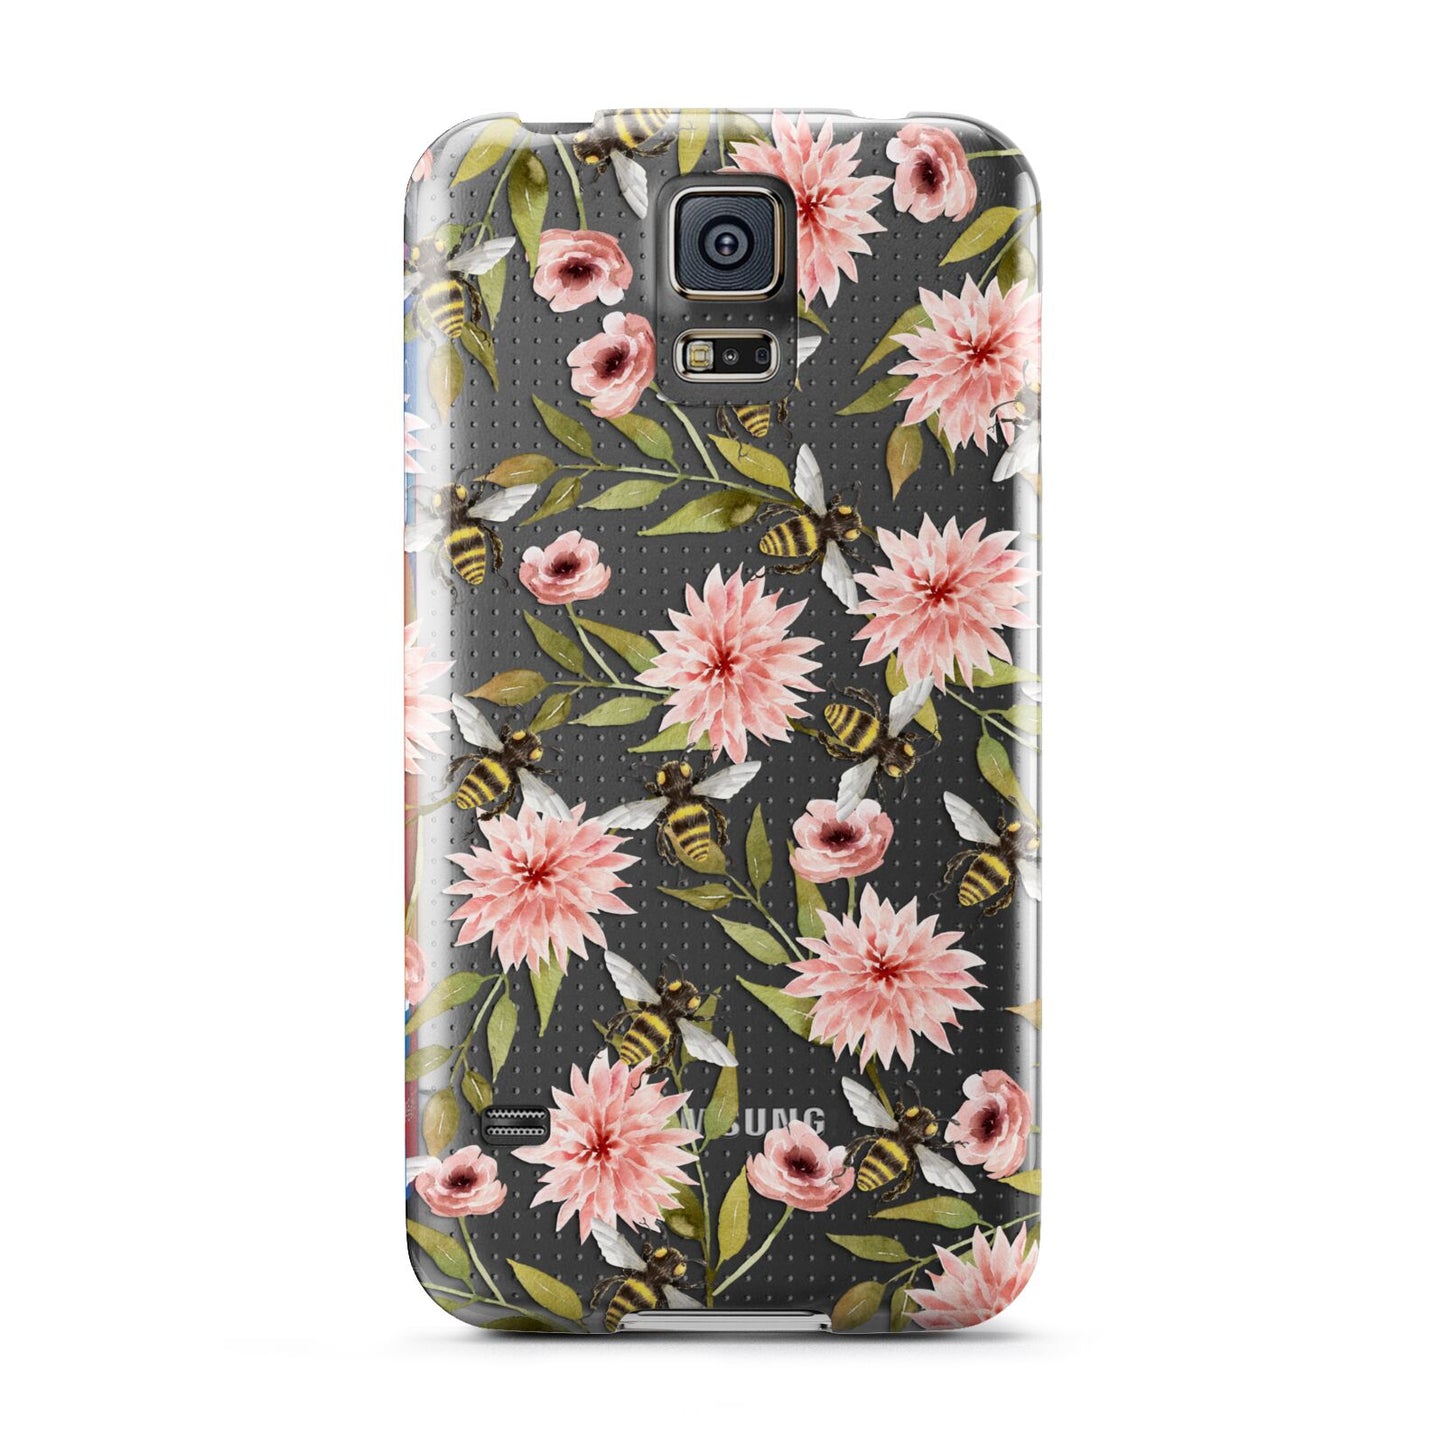 Pink Flowers and Bees Samsung Galaxy S5 Case